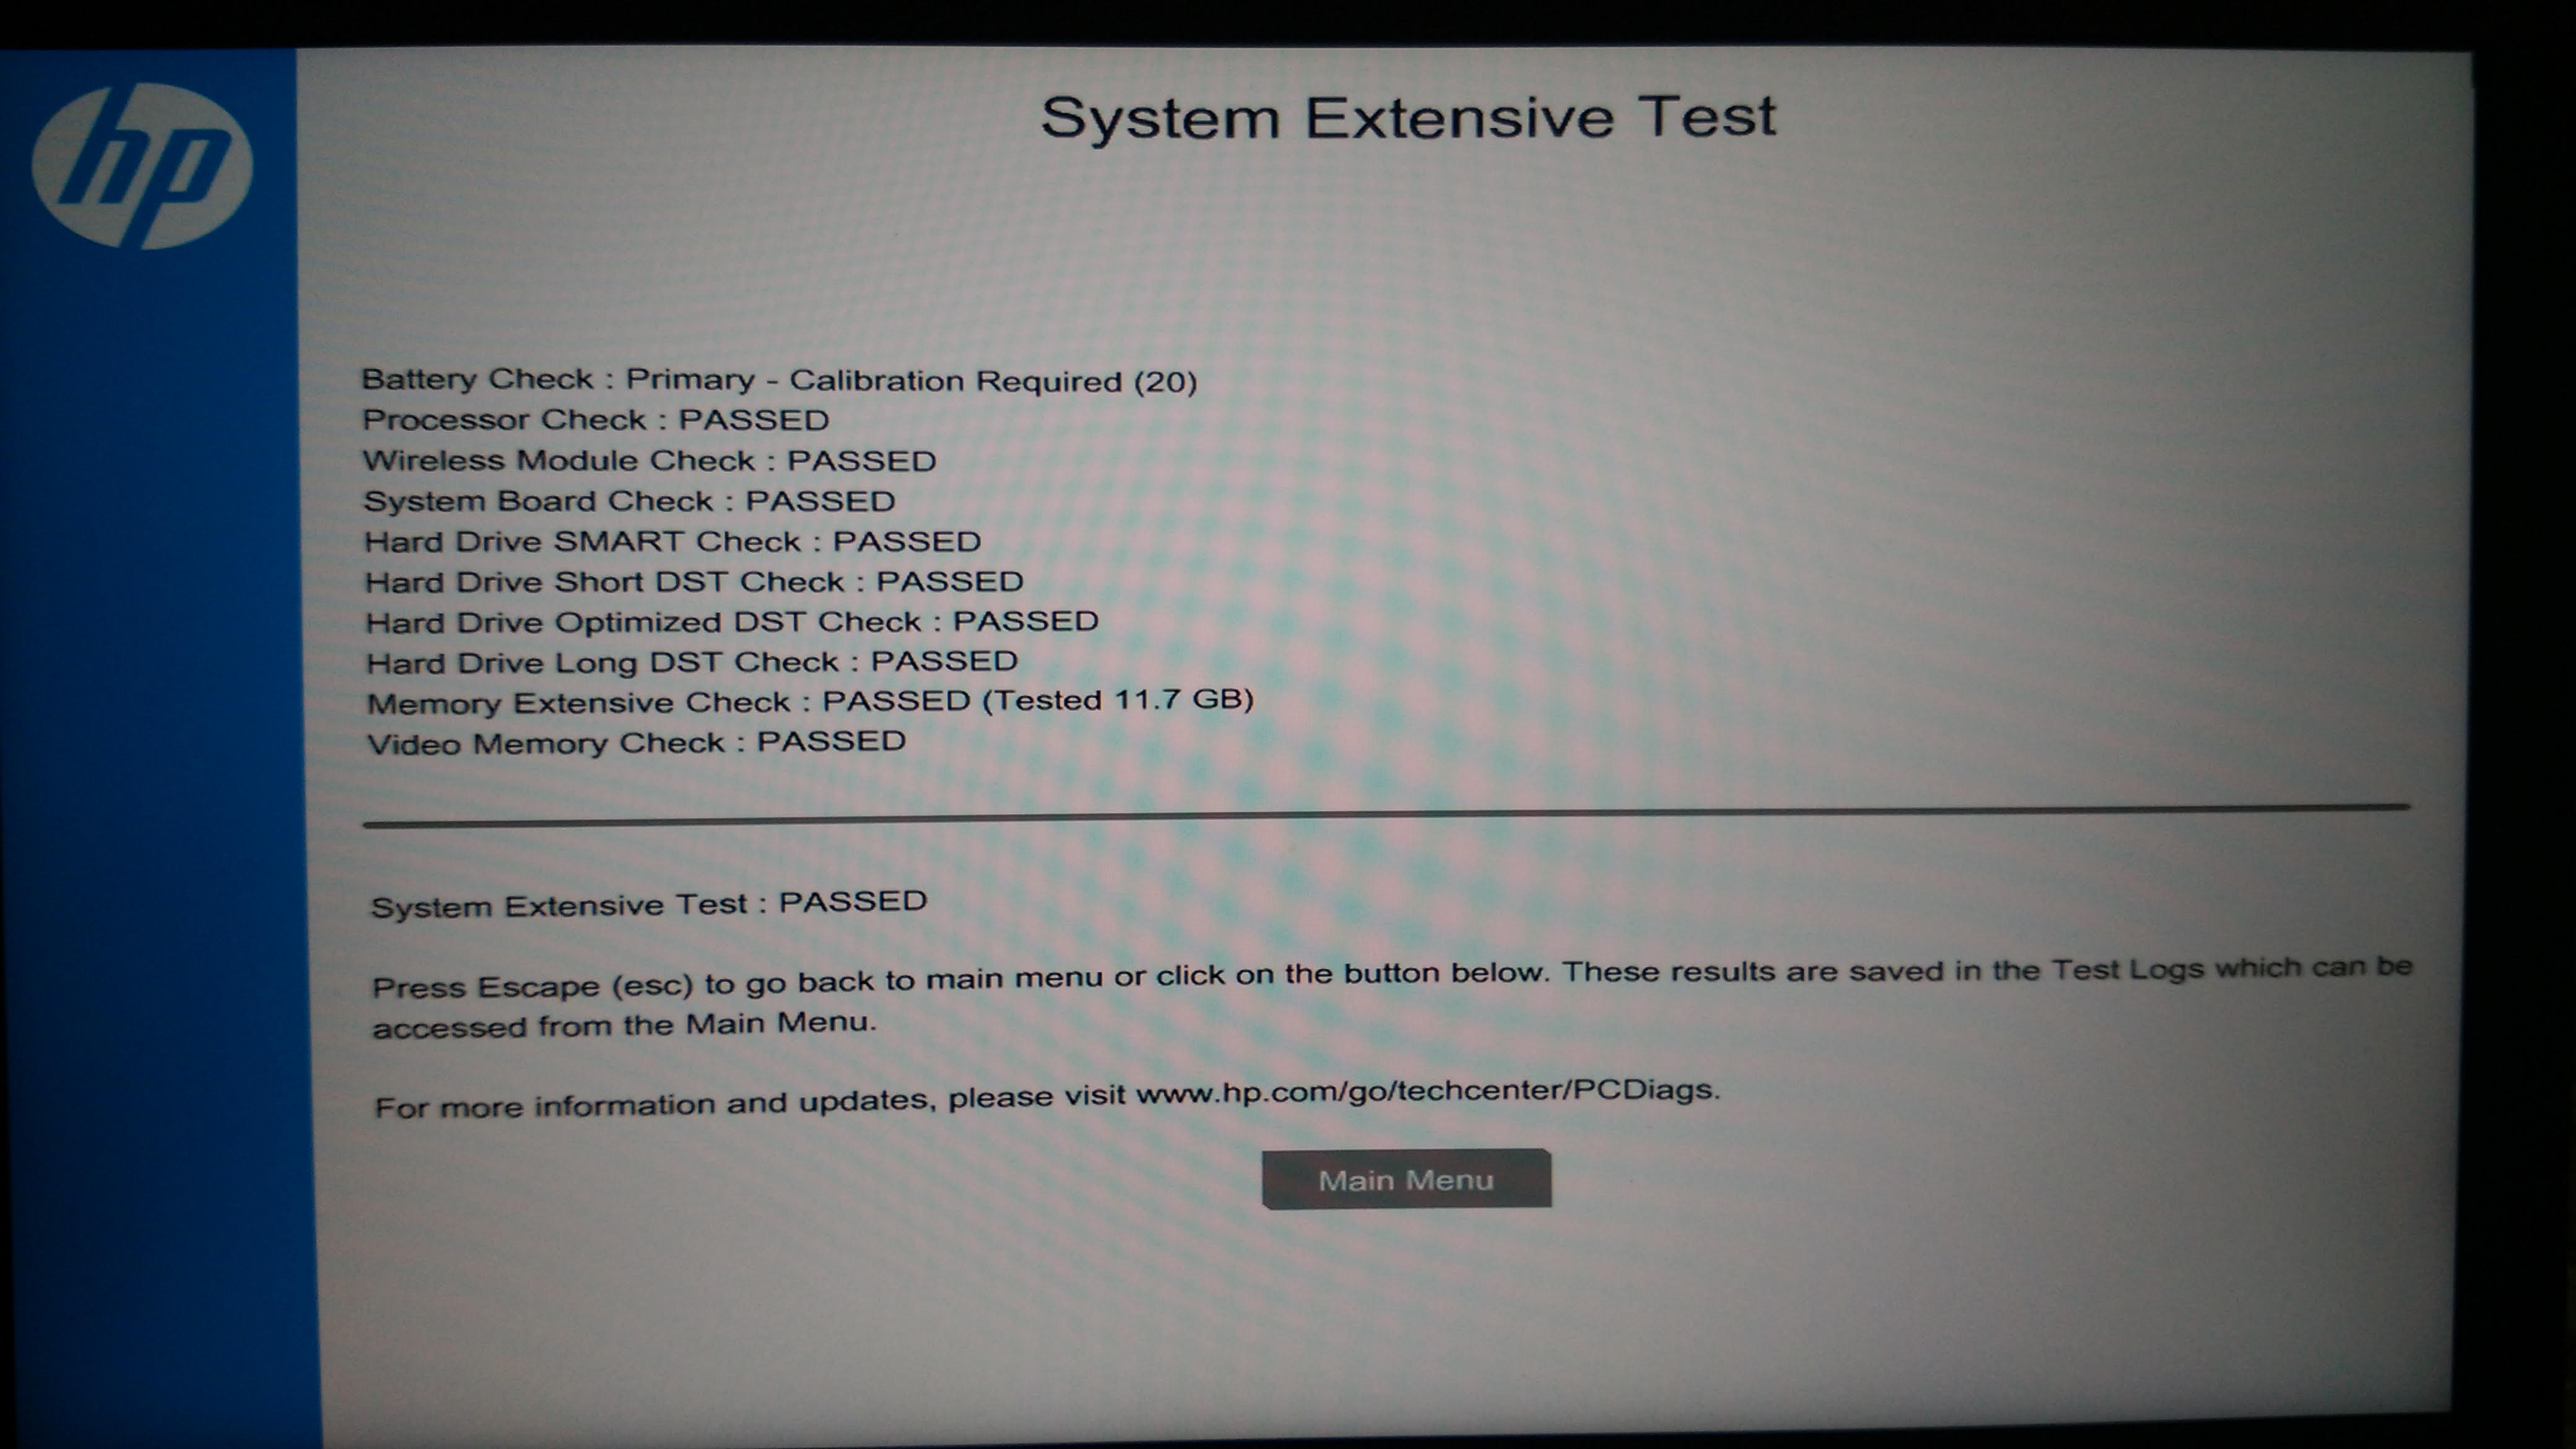 System Extensive Test